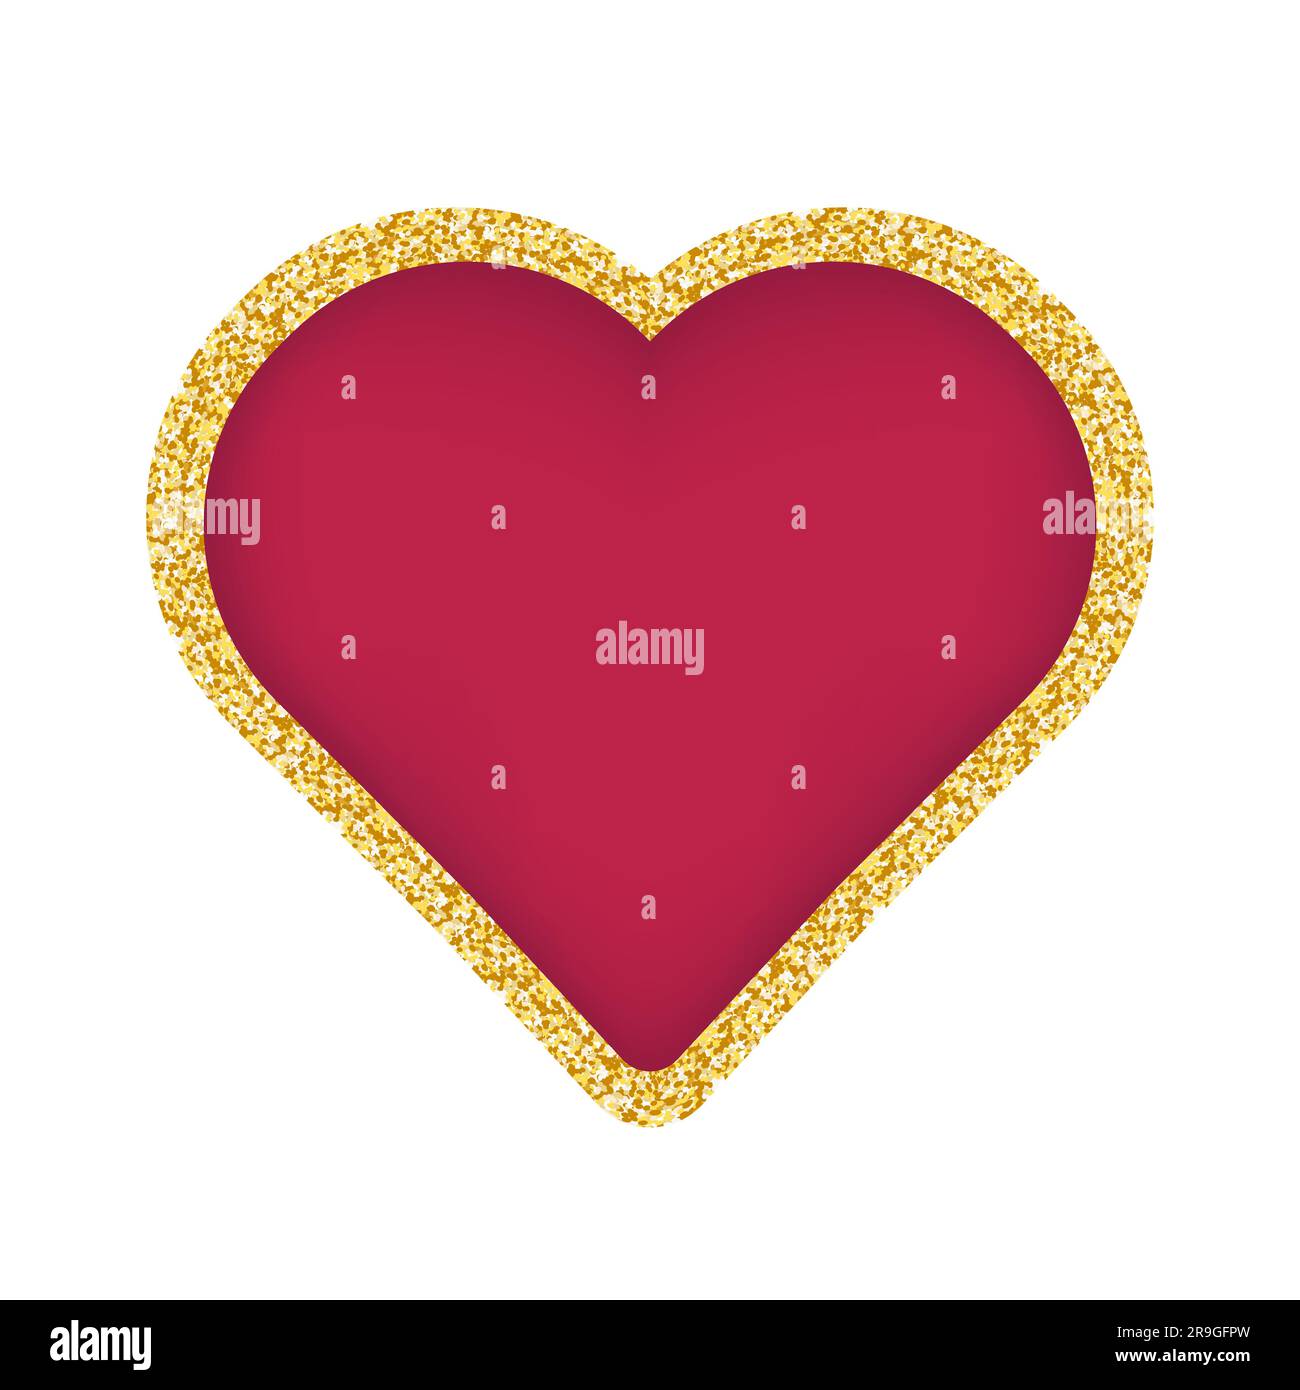 Heart mesh Stock Vector Images - Alamy